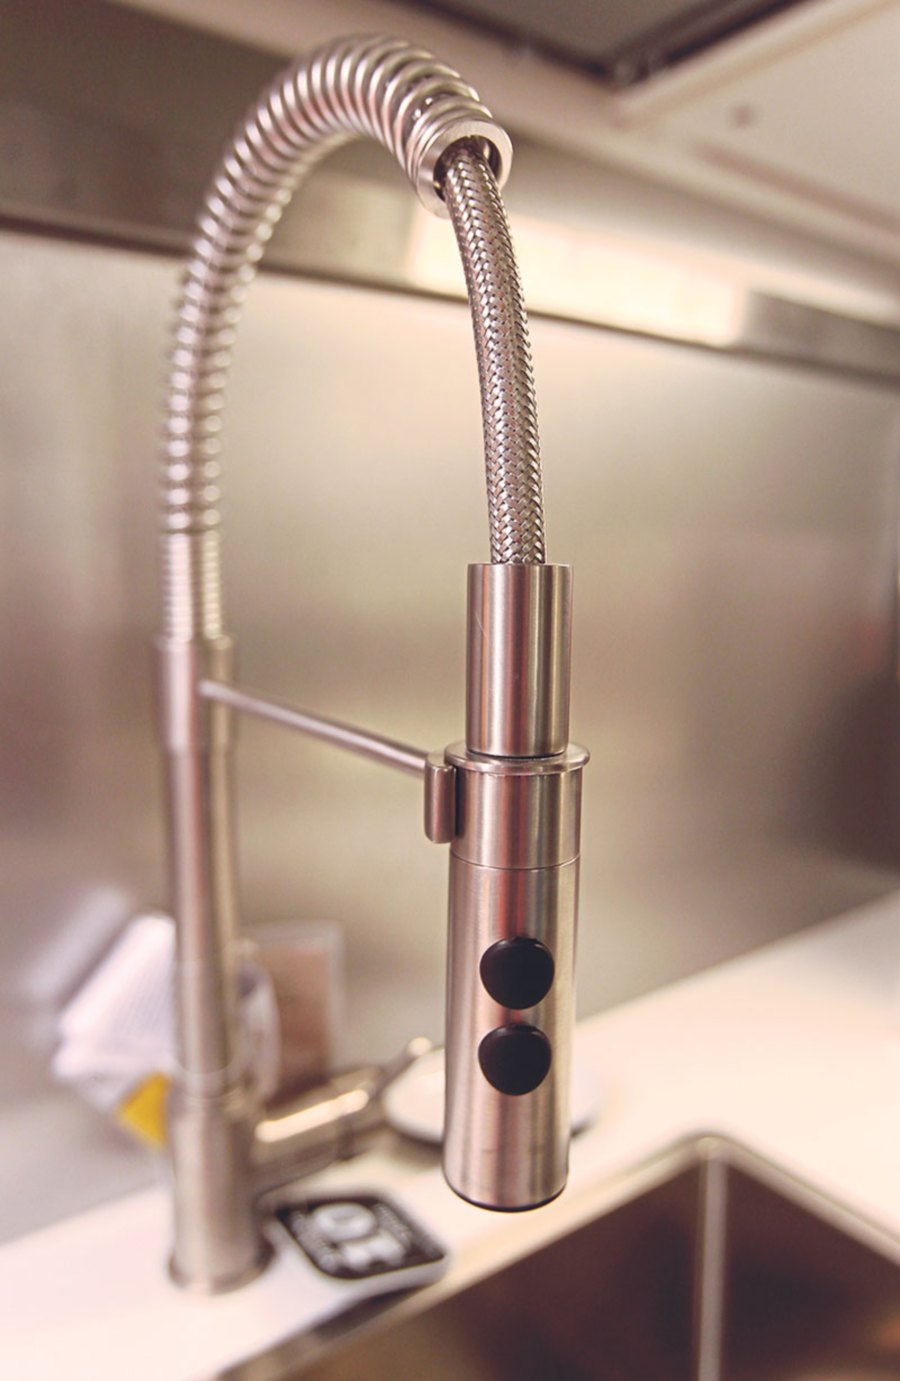 The kitchen mixer tap can save energy and water.